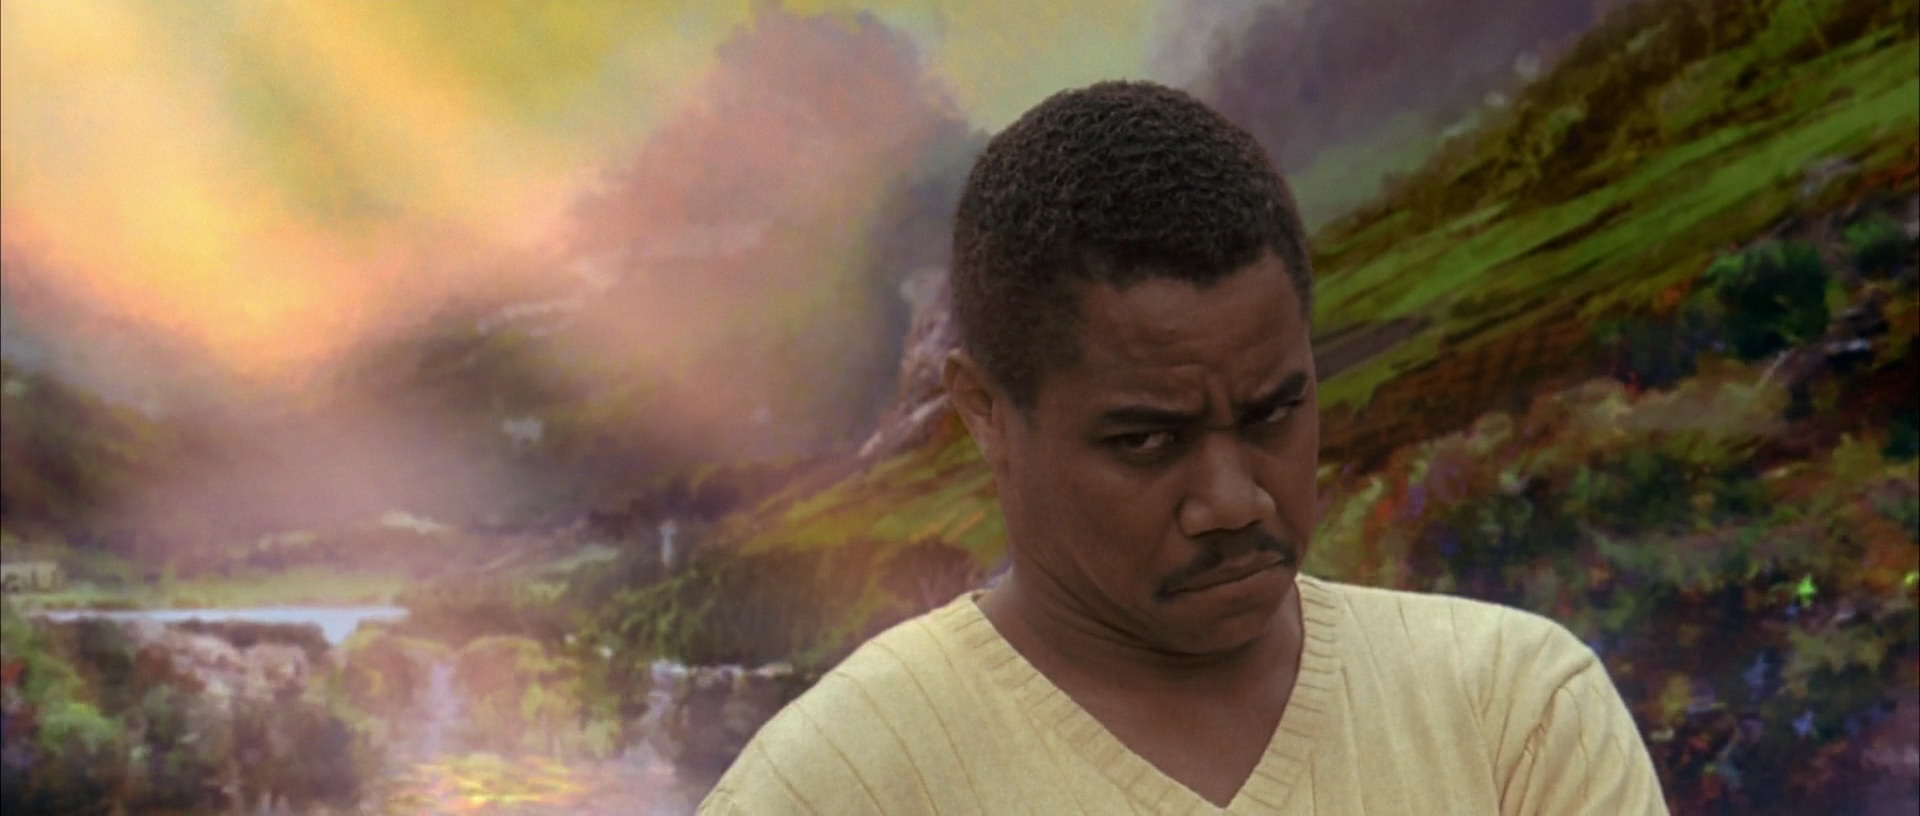 Cuba Gooding Jr. in What Dreams May Come